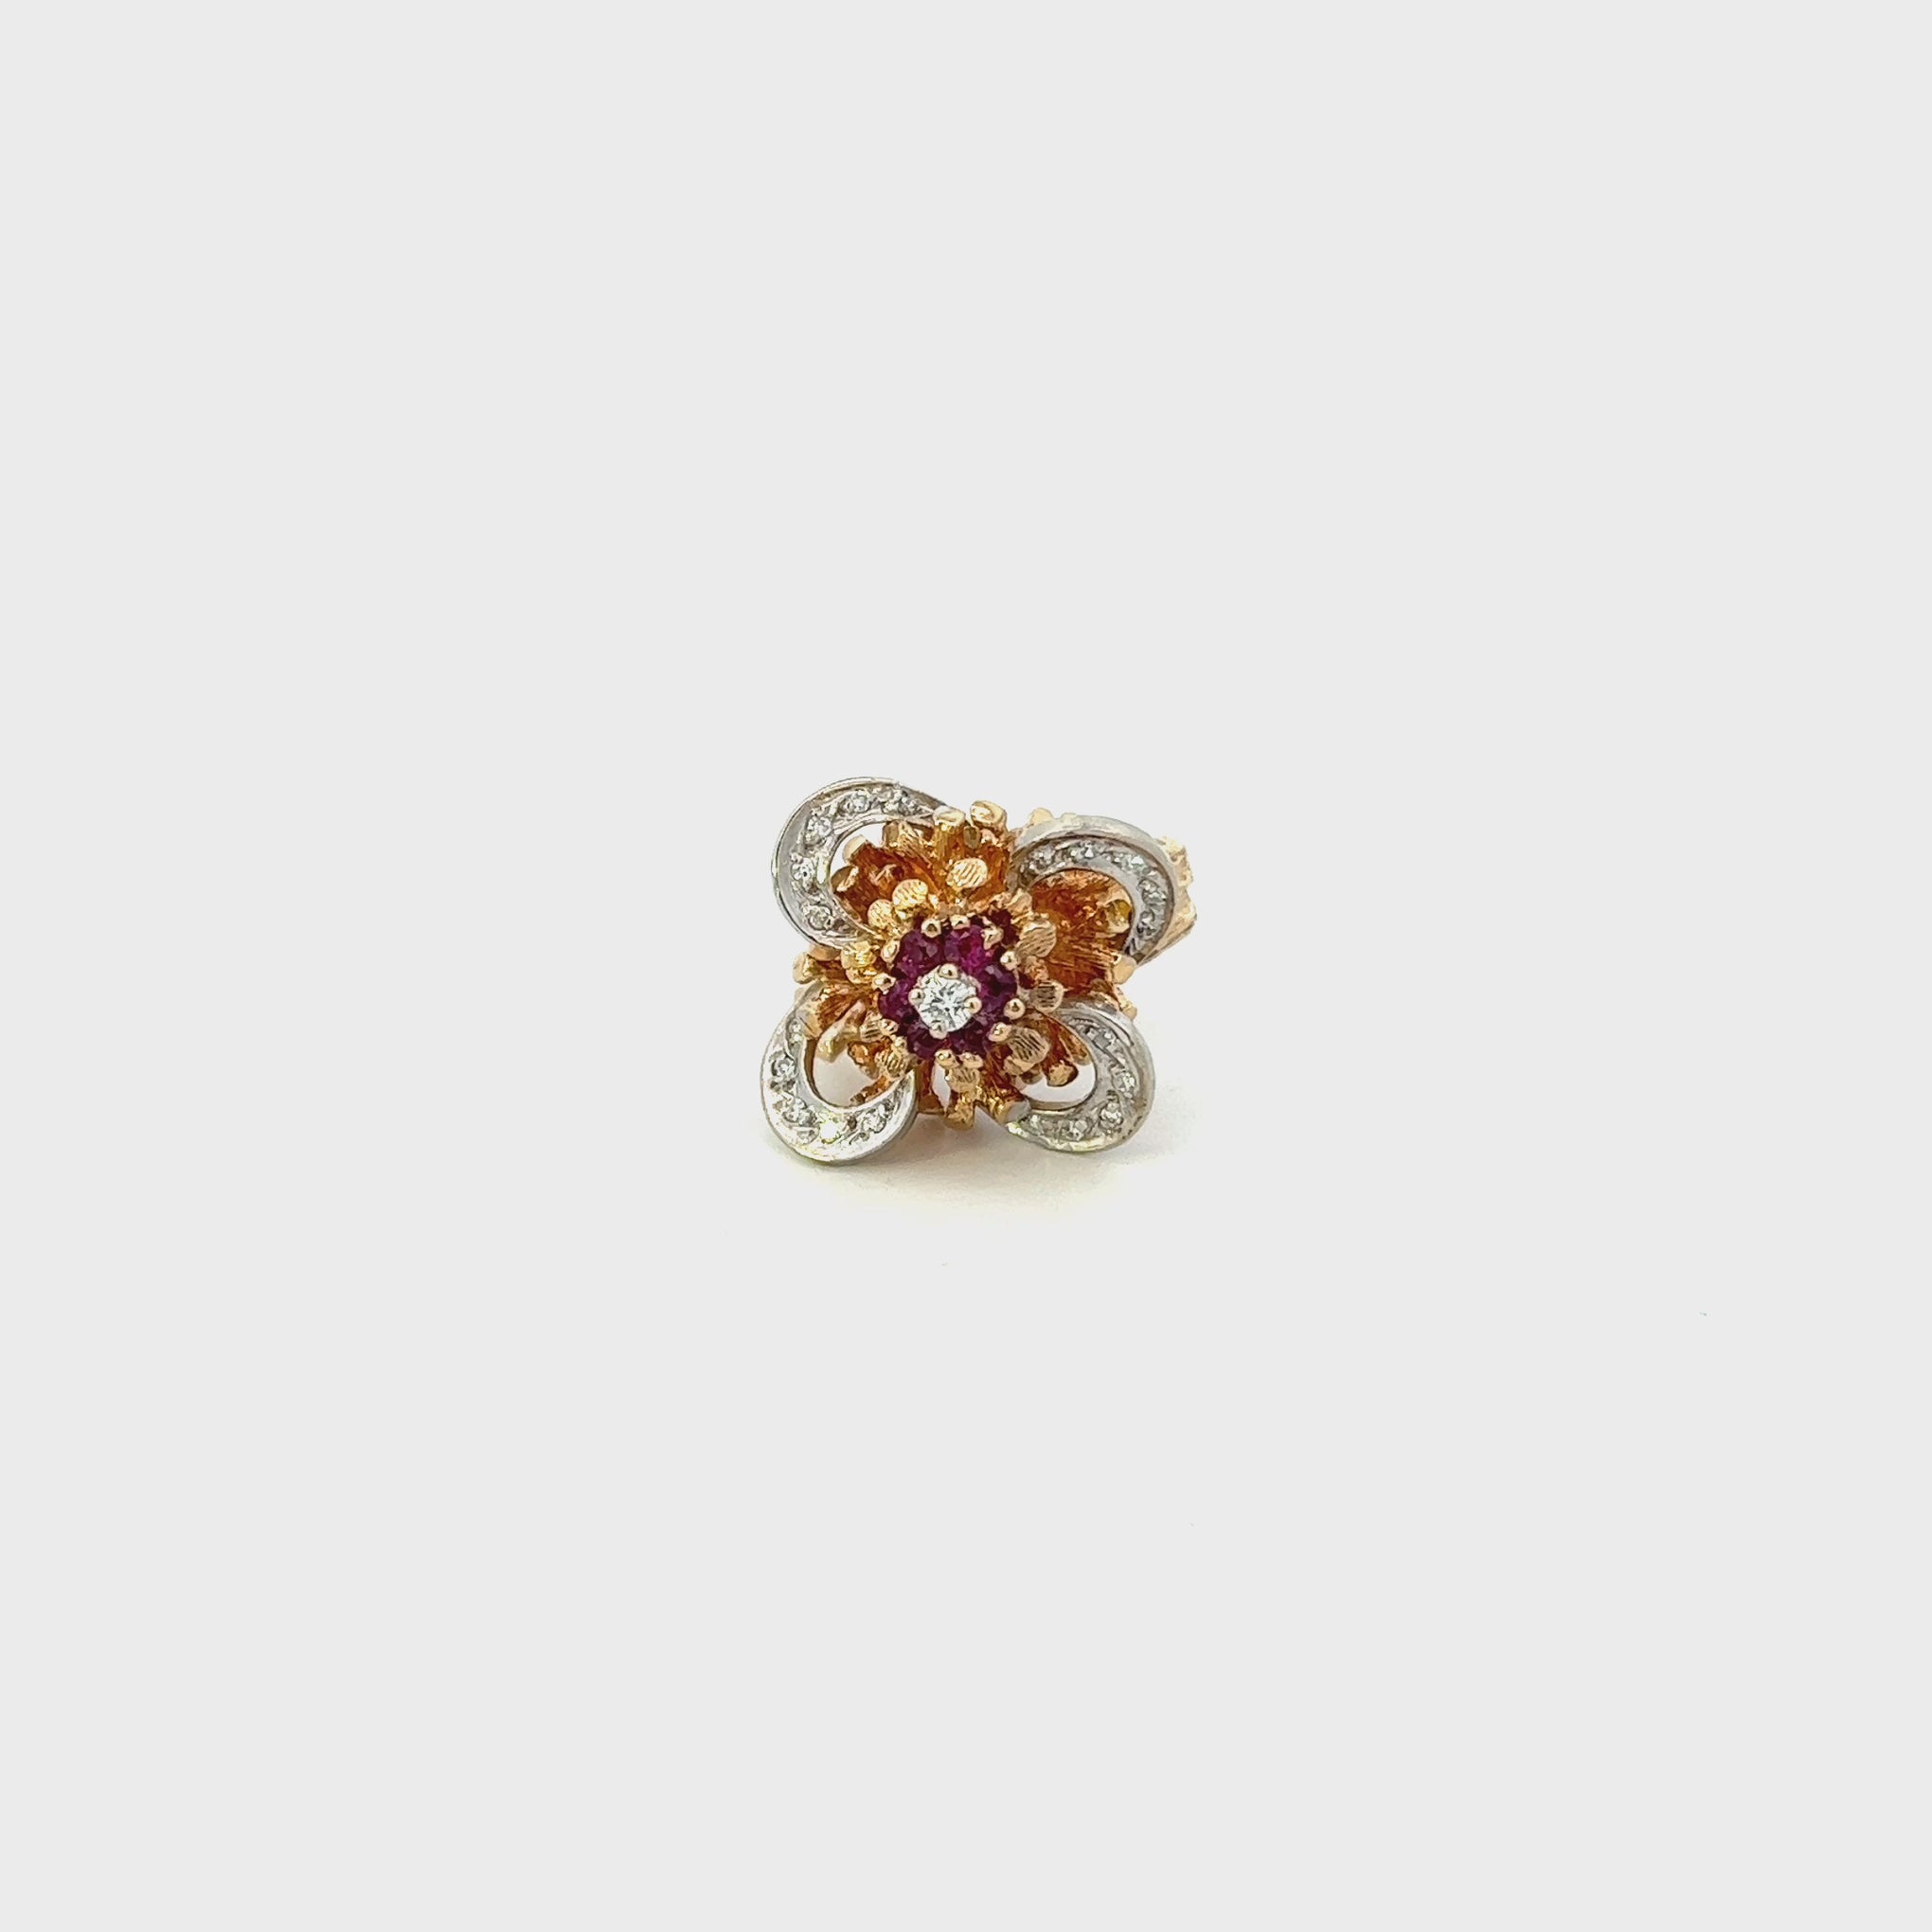 VINTAGE, 14KT ROUND CUT DIAMOND AND RUBY FANCY FLOWER RING.